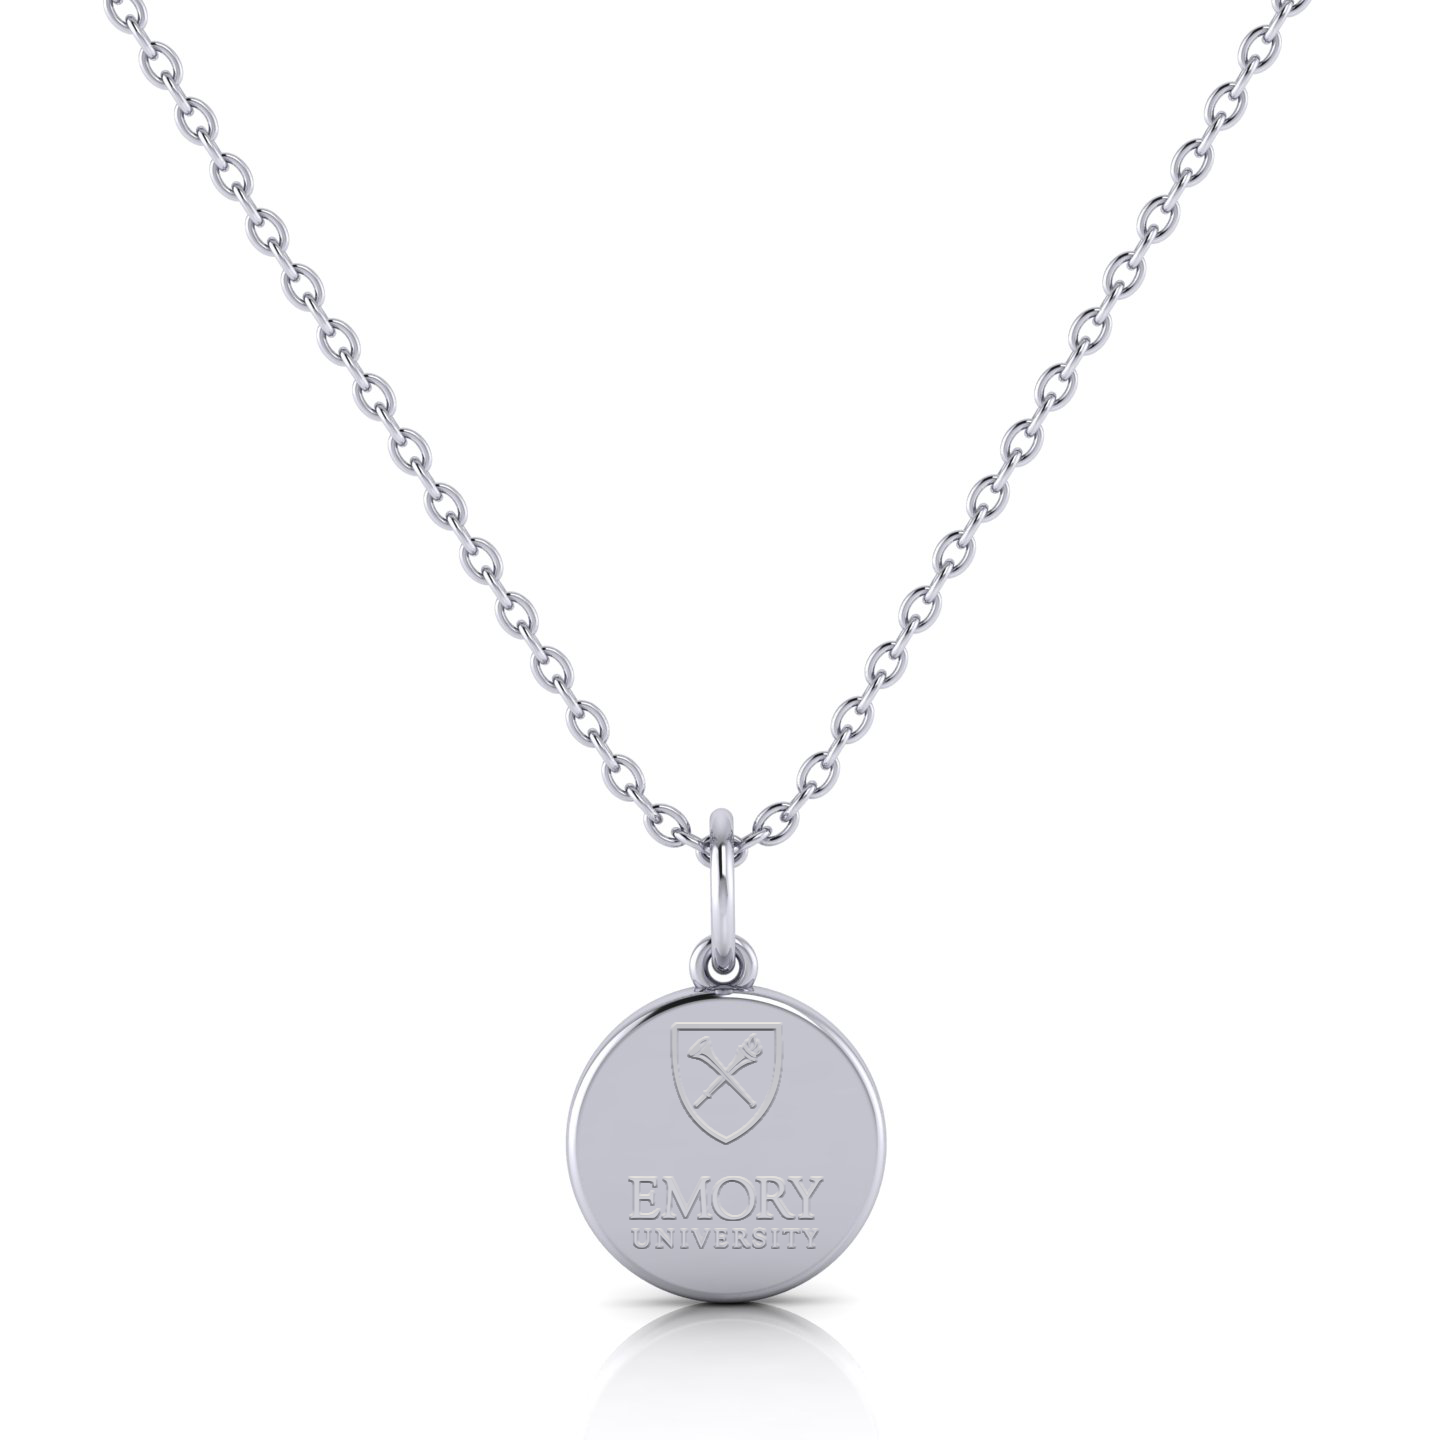 A large circle pendant in sterling silver. The pendant features a raised Emory University seal in the center of the circle. 